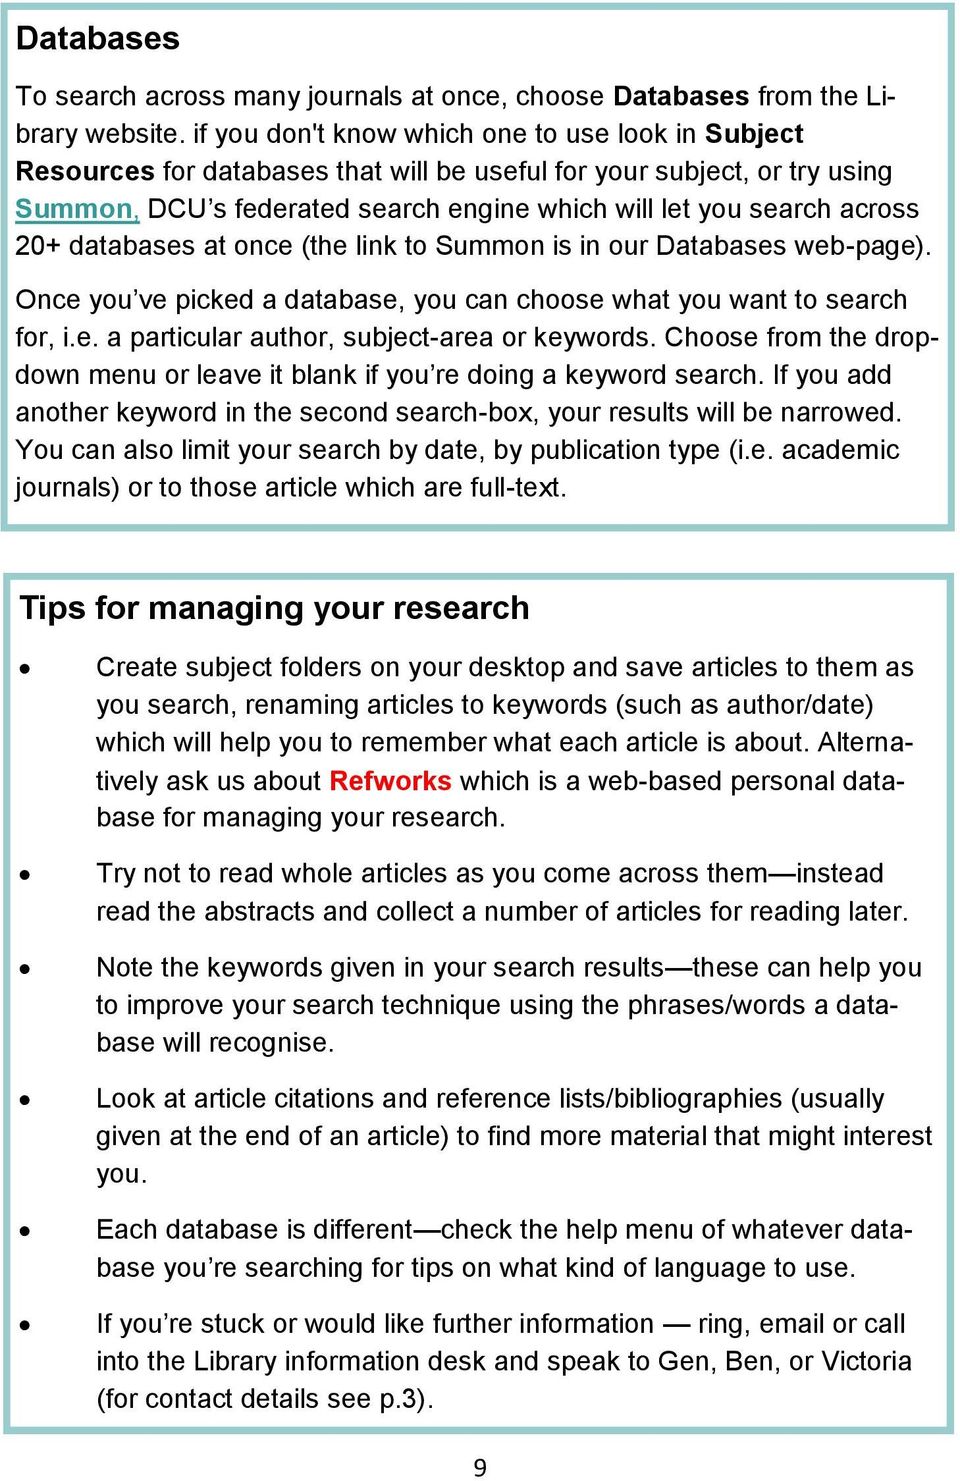 20+ databases at once (the link to Summon is in our Databases web-page). Once you ve picked a database, you can choose what you want to search for, i.e. a particular author, subject-area or keywords.